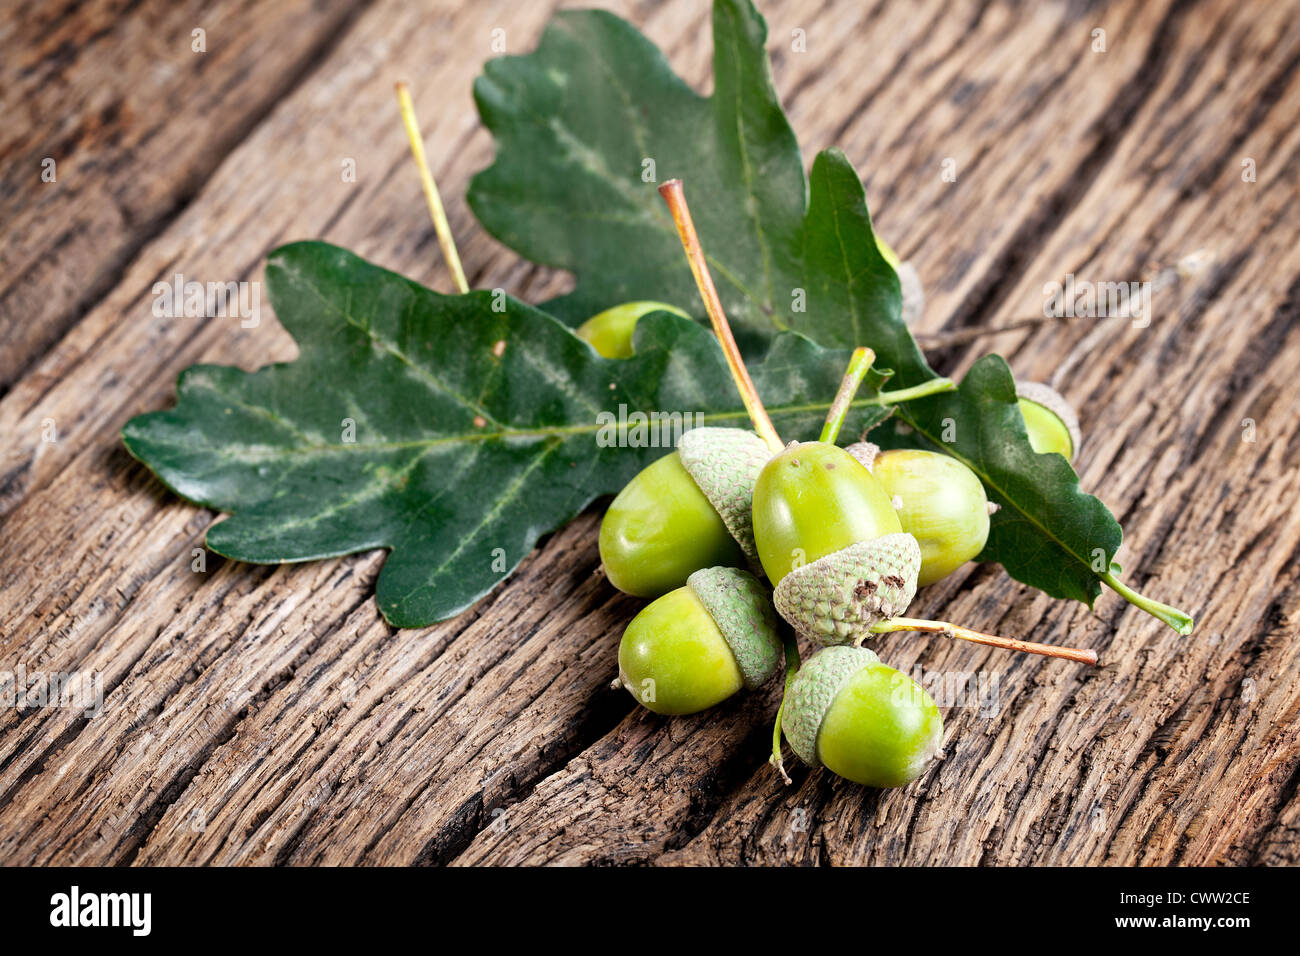 Acorn with leaves on a old wooden table Stock Photo